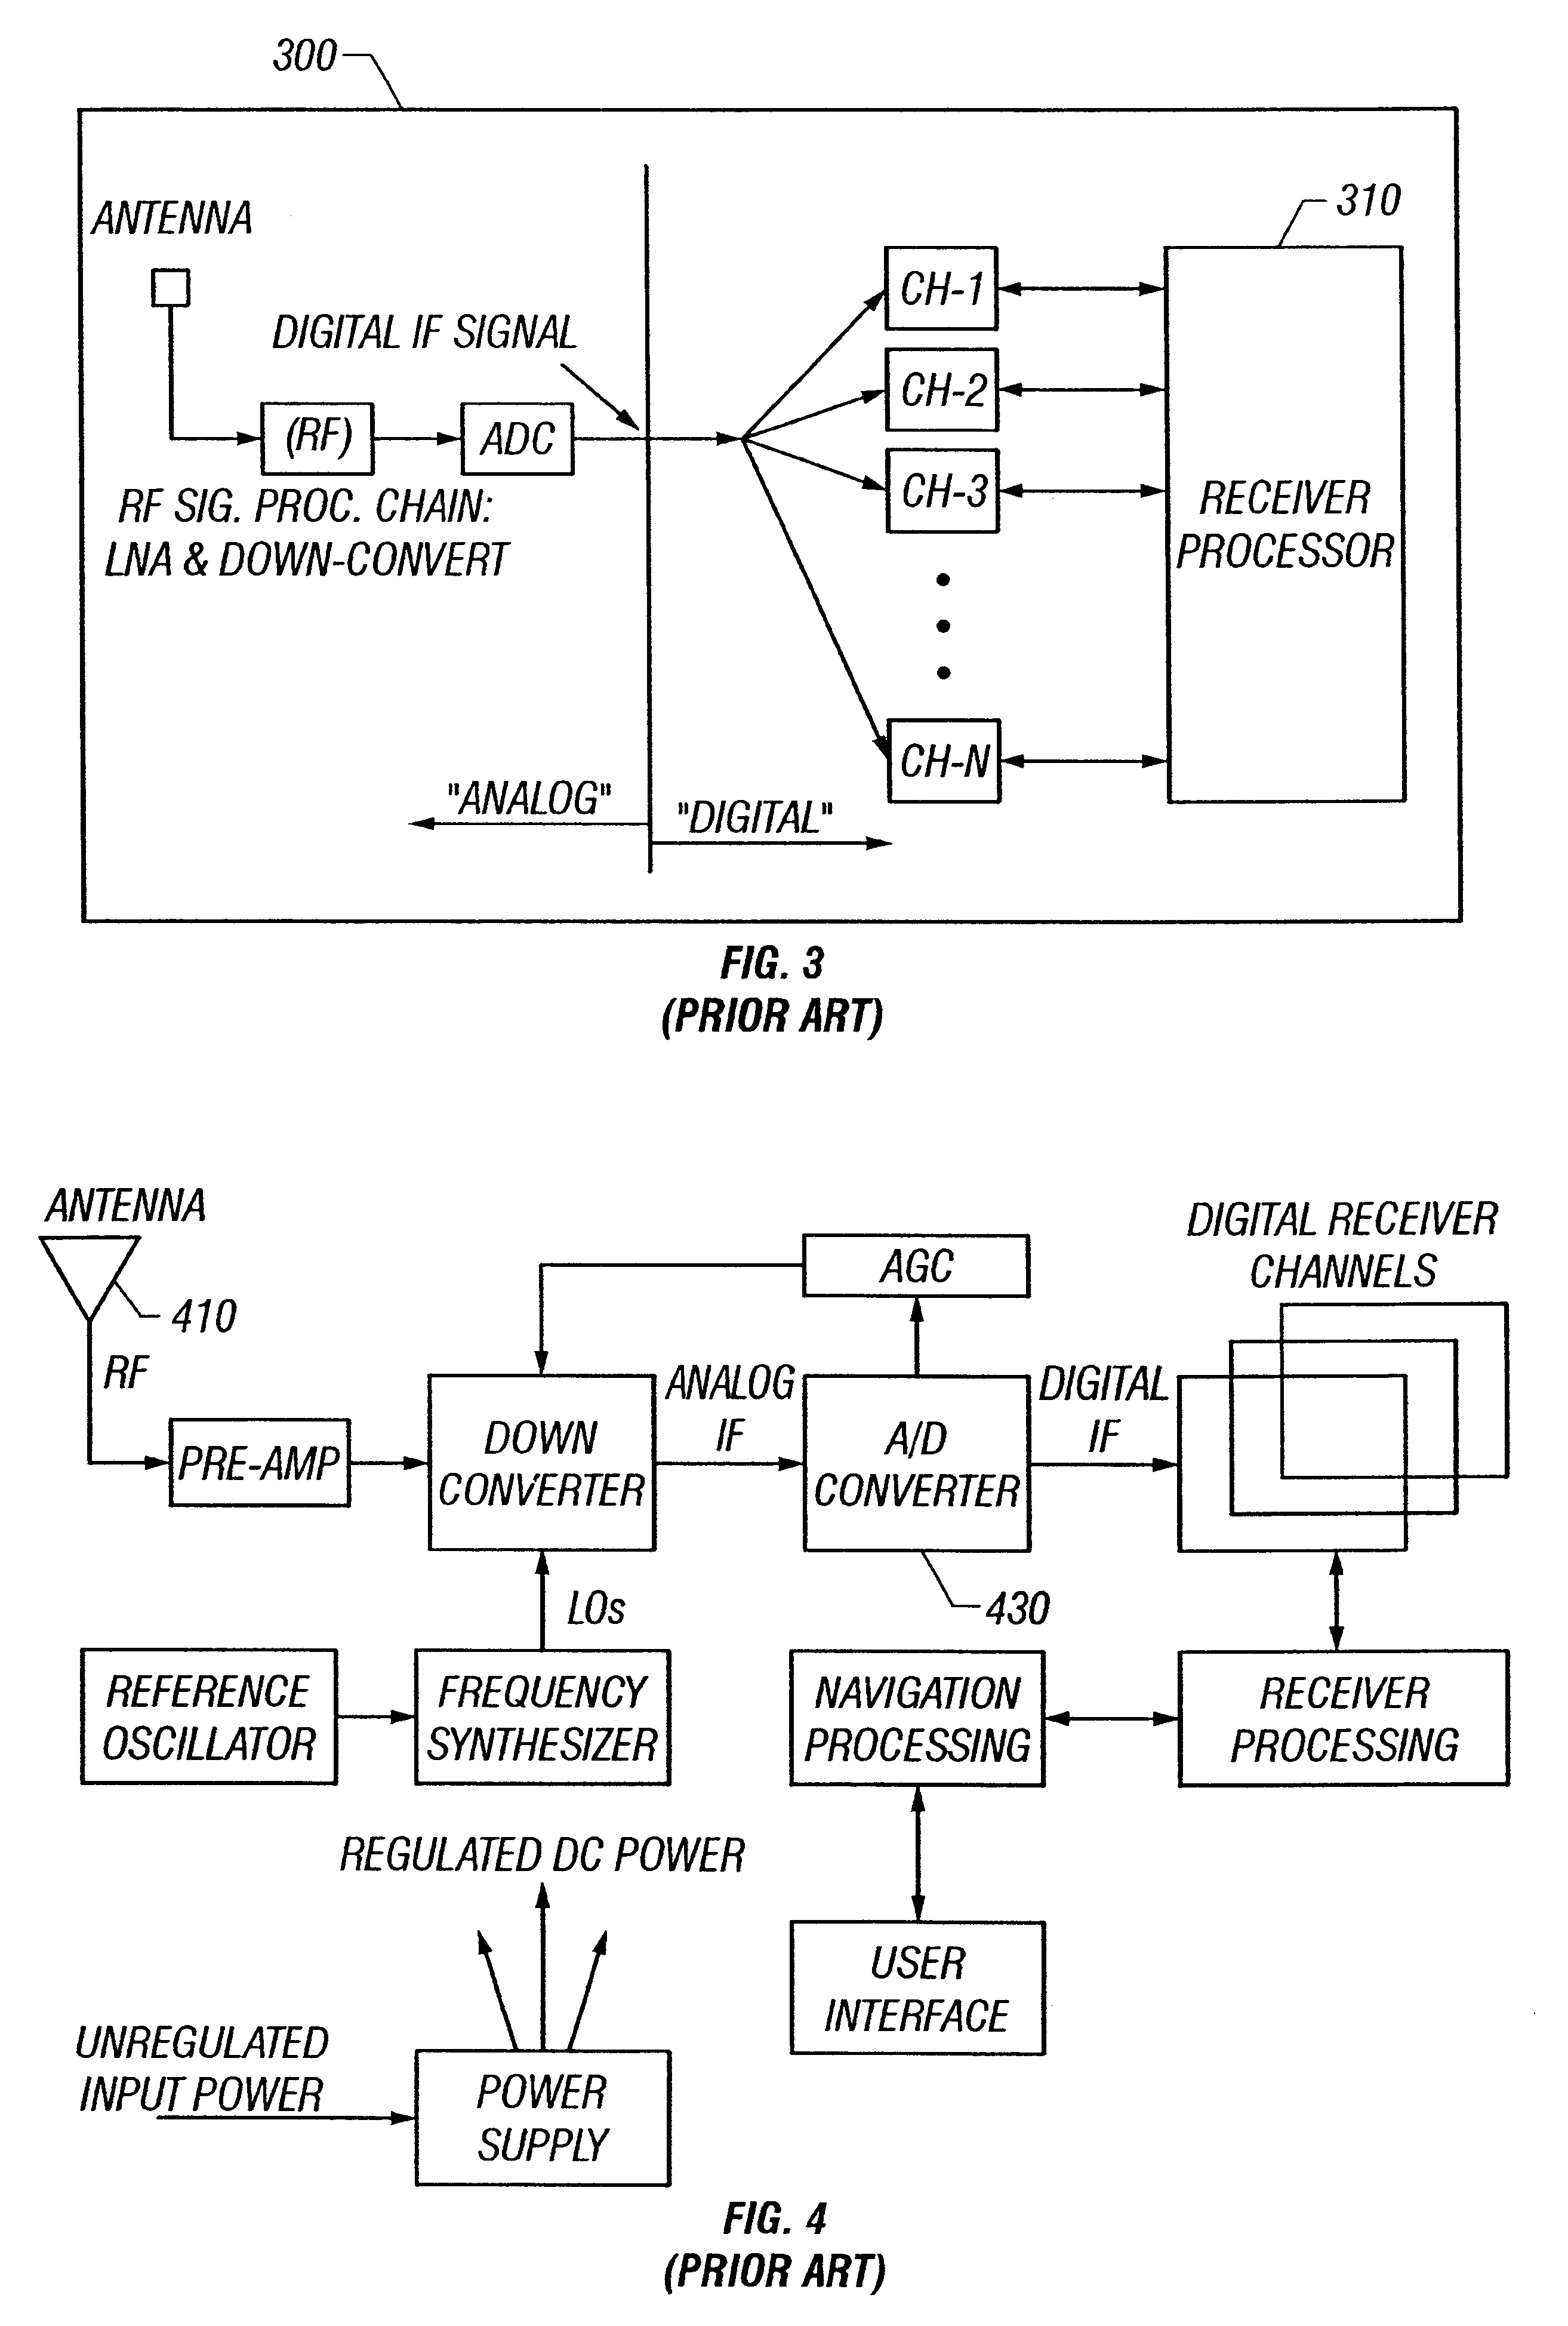 Global positioning system receiver capable of functioning in the presence of interference